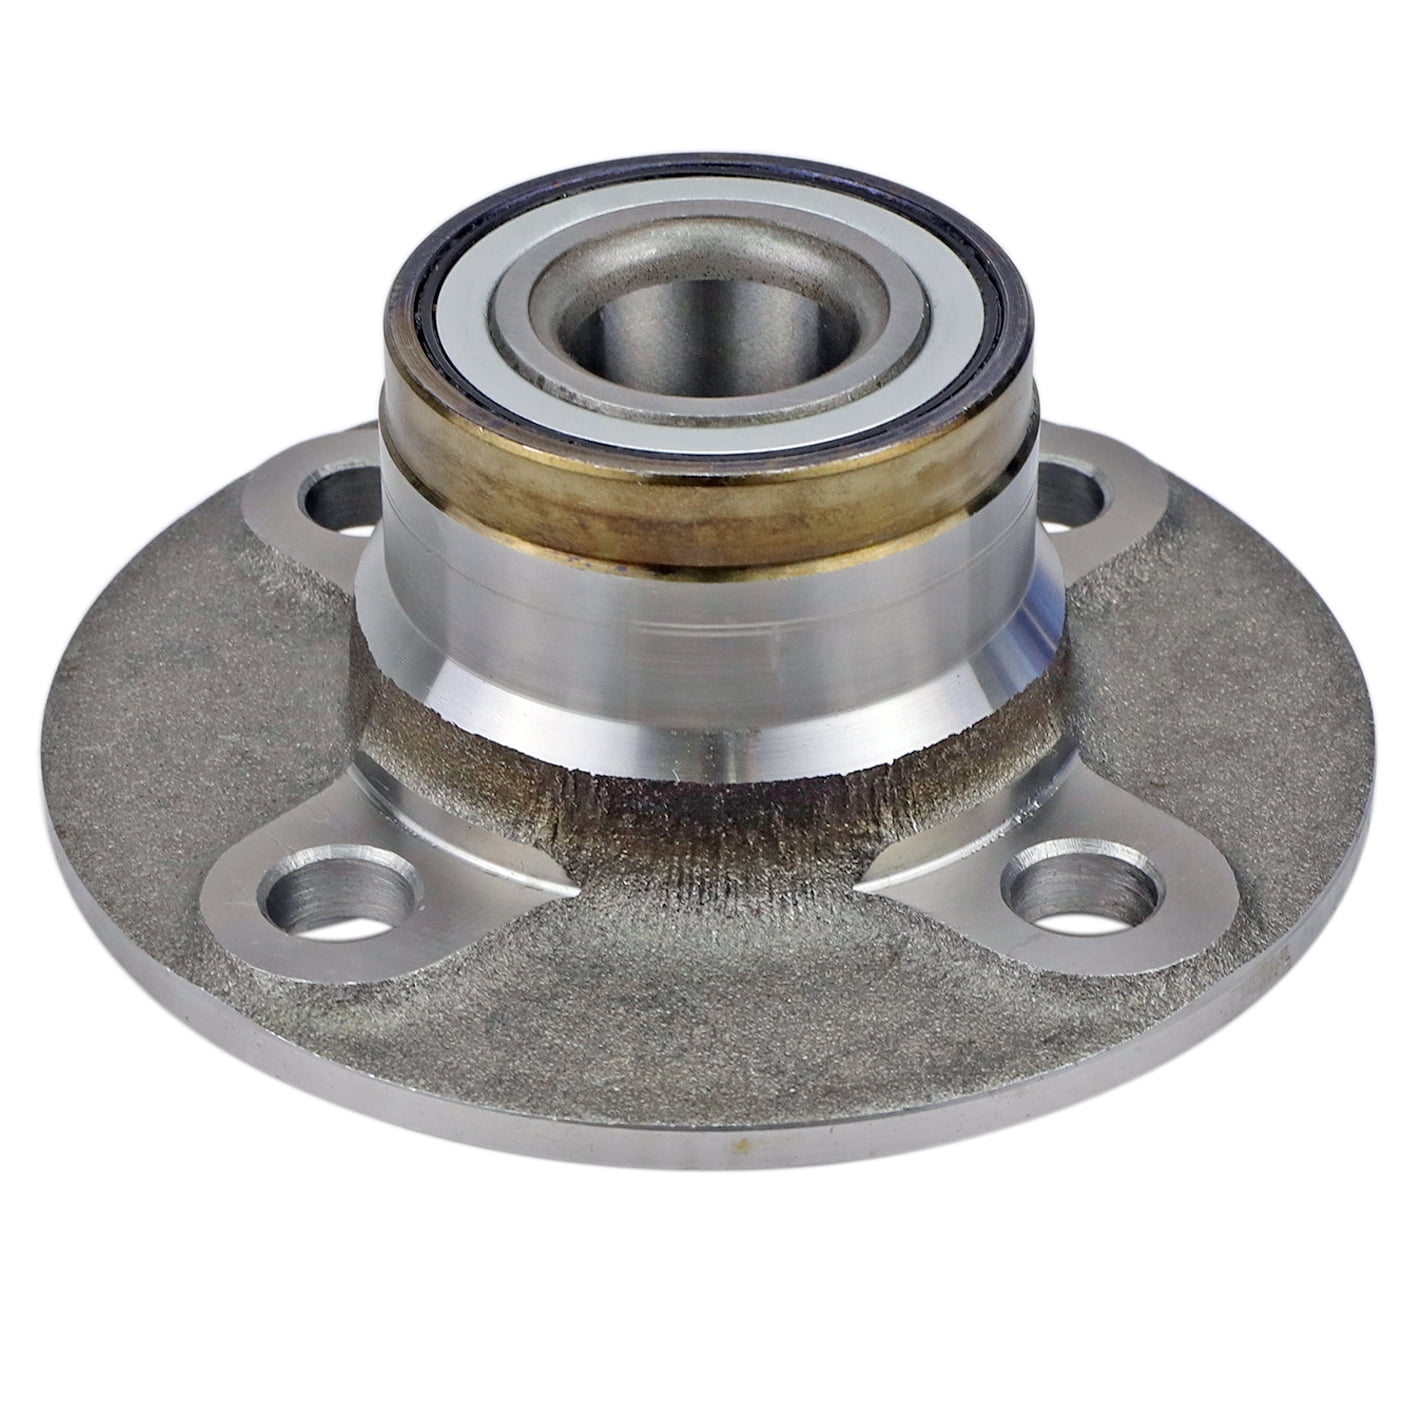 SCITOO Compatible with 512025 Rear Wheel Hub Bearing Assembly fit Nissan 4 Lugs 